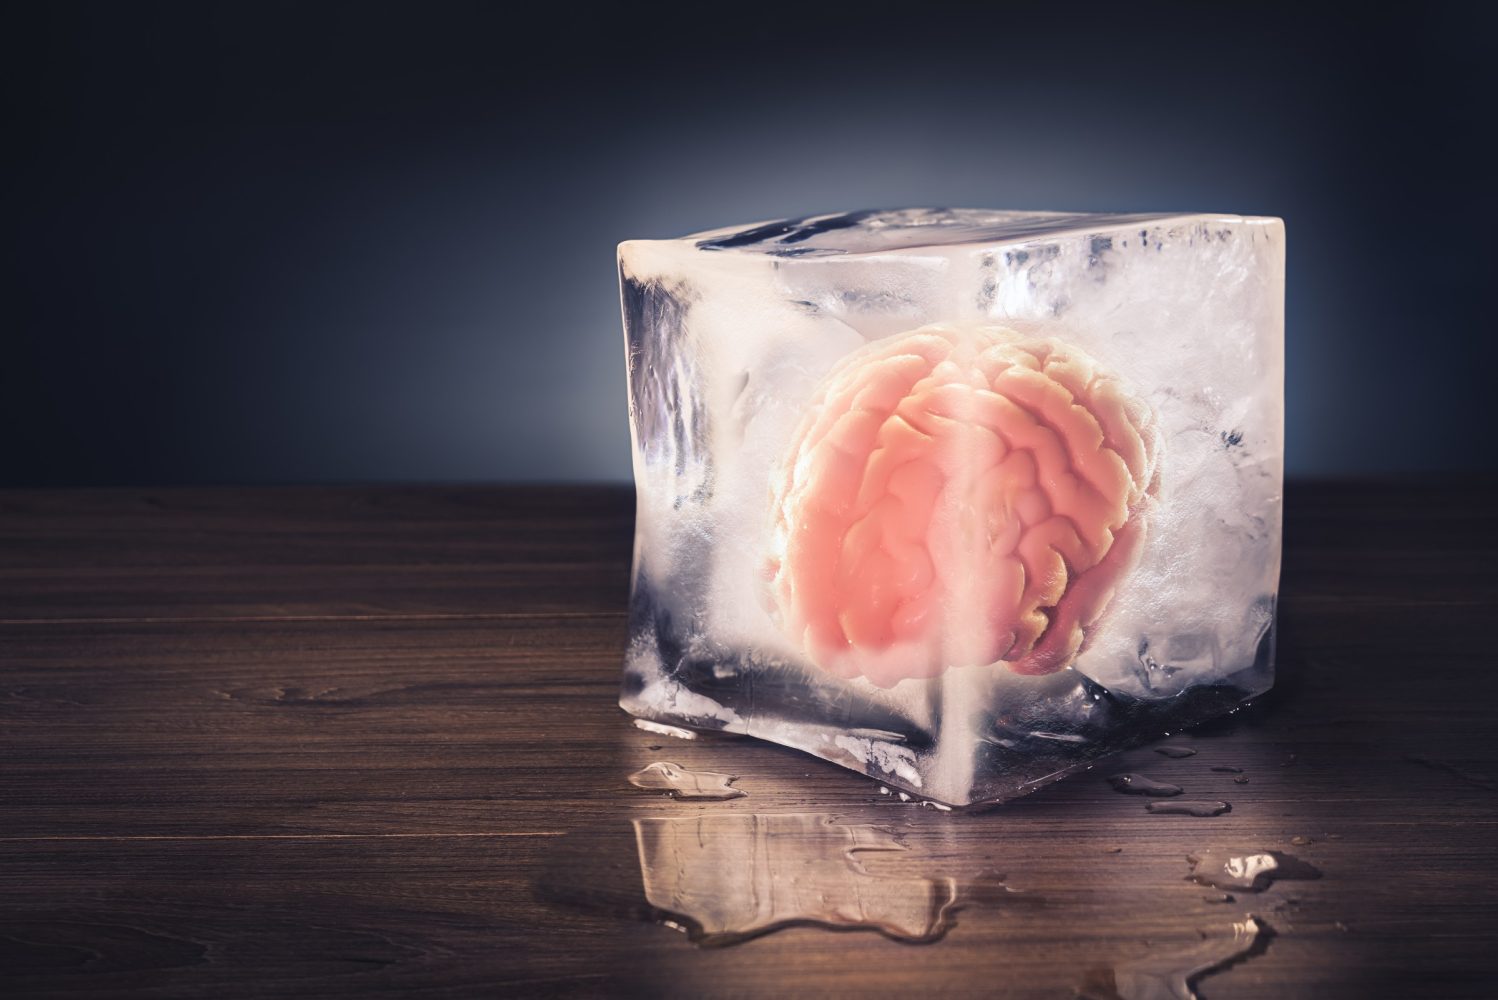 Frozen human brain tissue was successfully revived for the first time